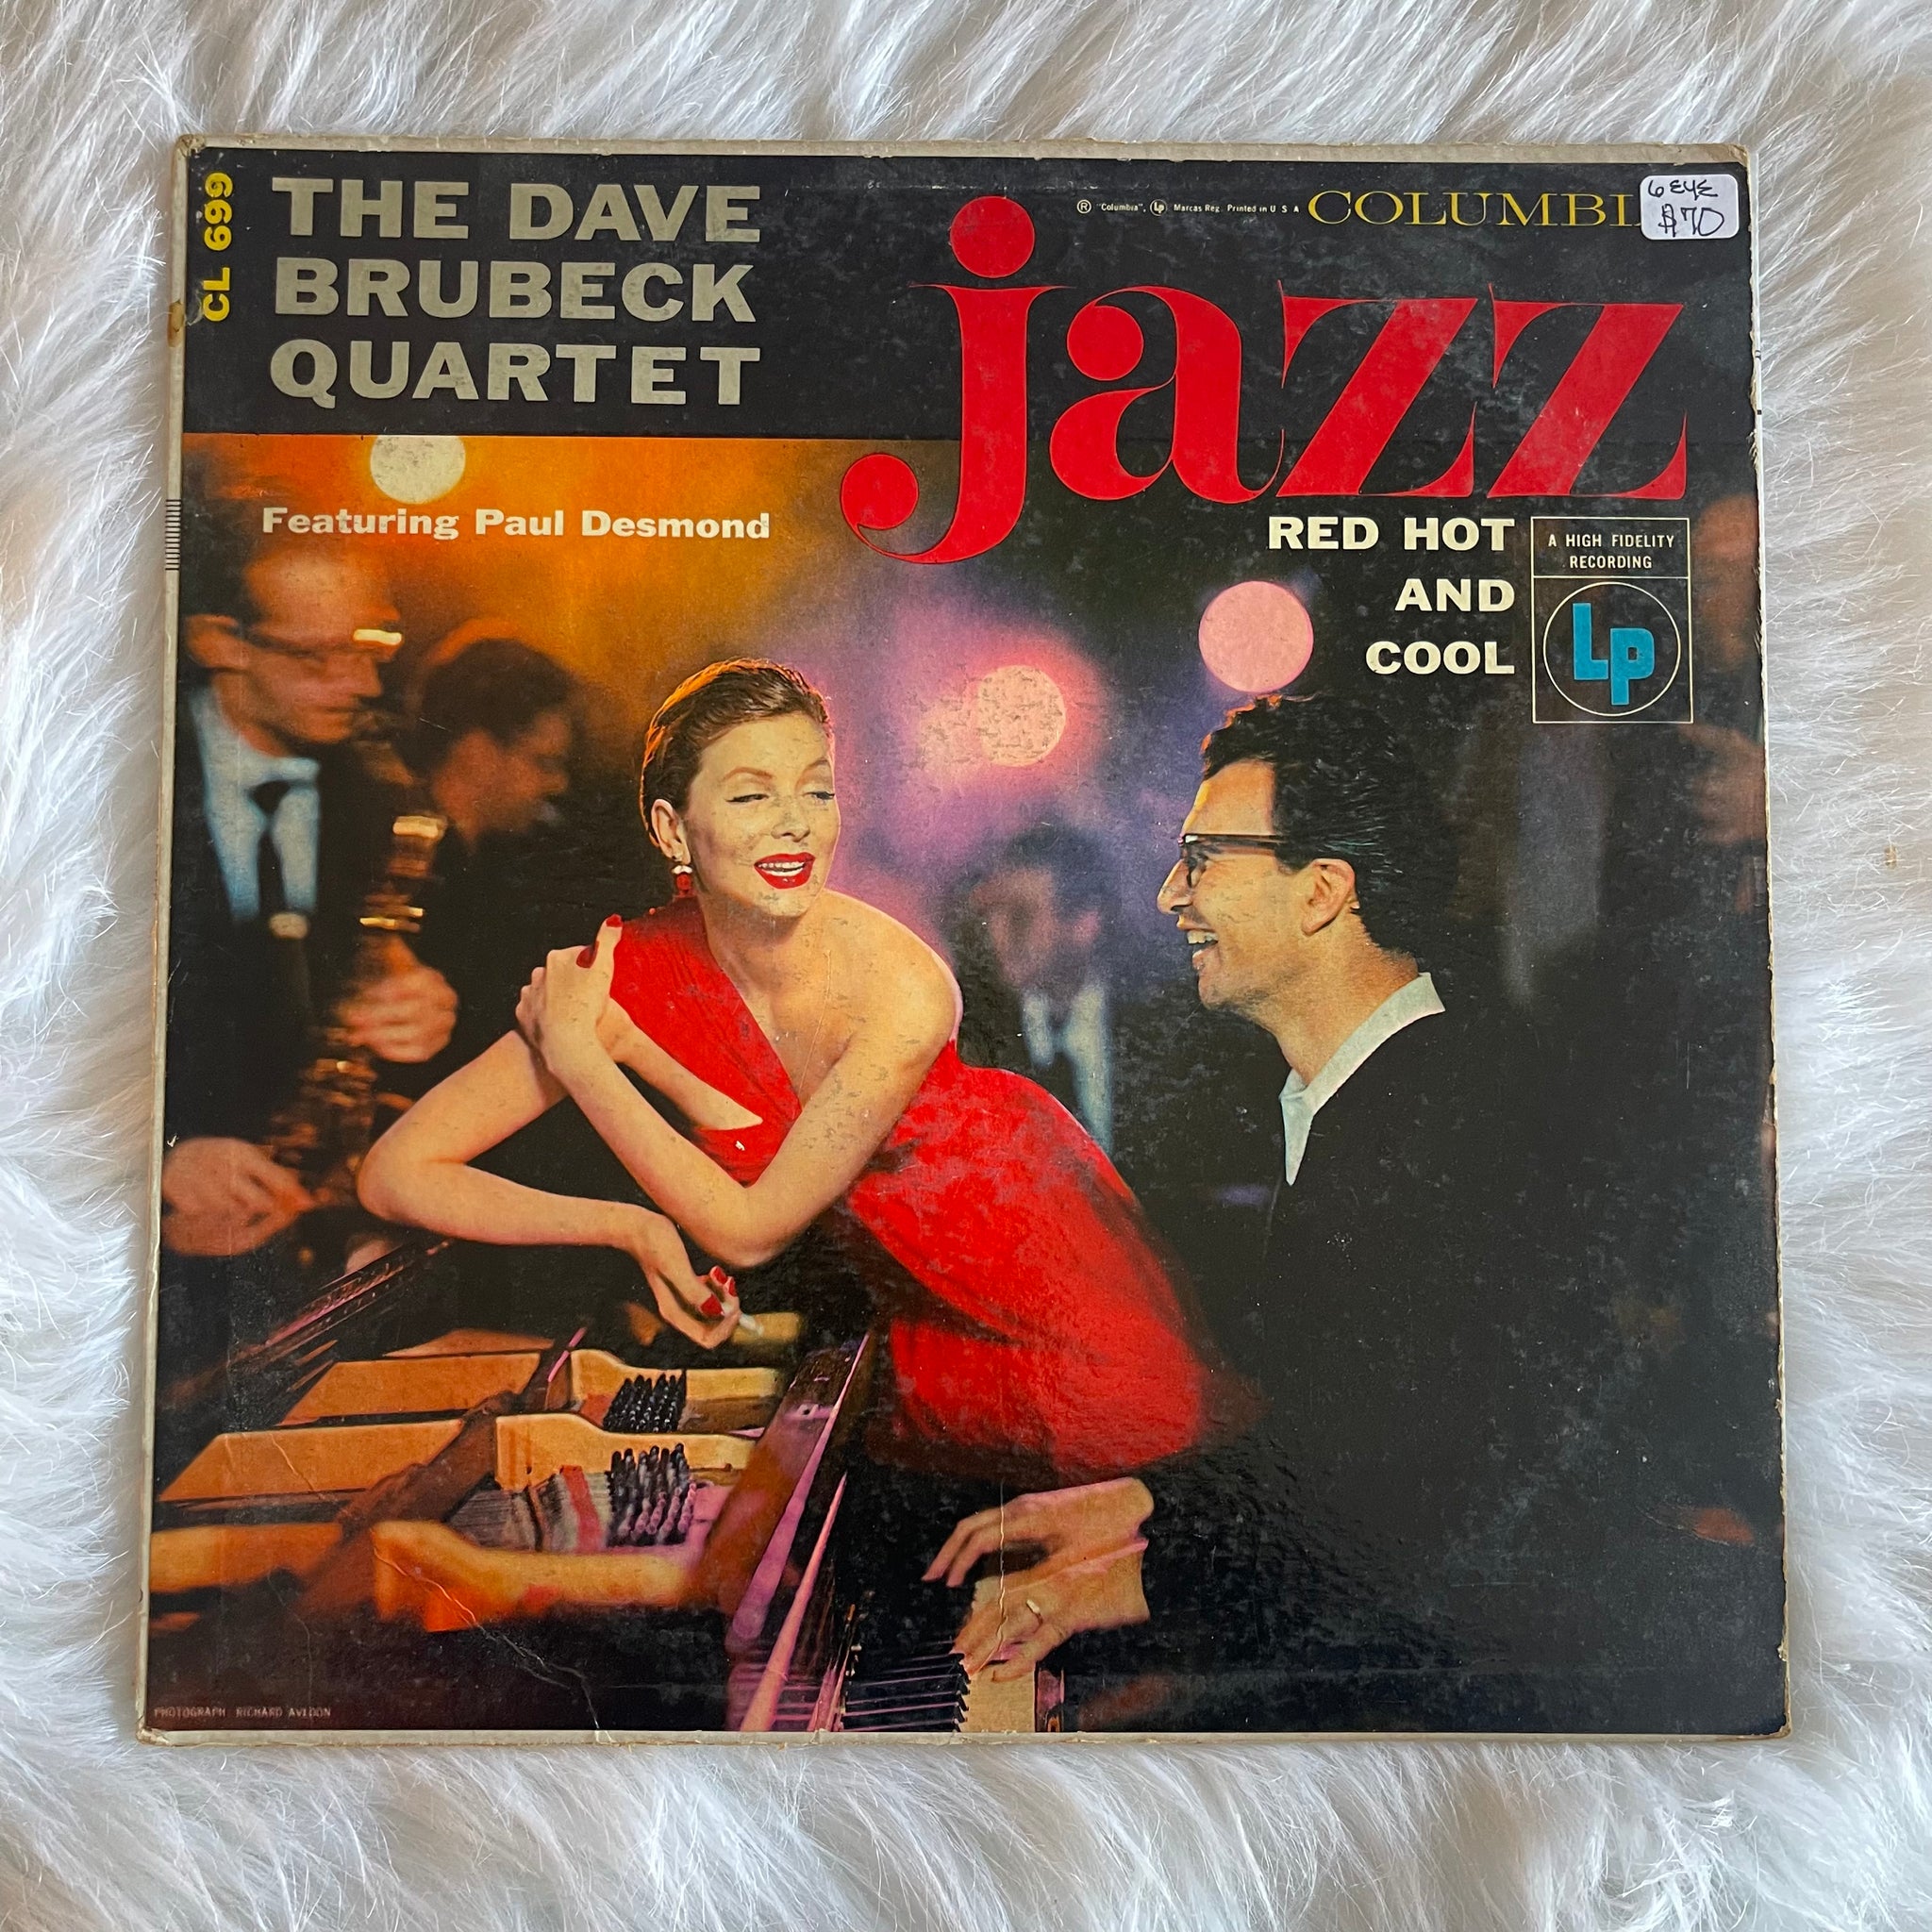 Dave Brubeck Quartet-JAZZ Red Hot and Cool SIX EYE COLUMBIA RECORDS